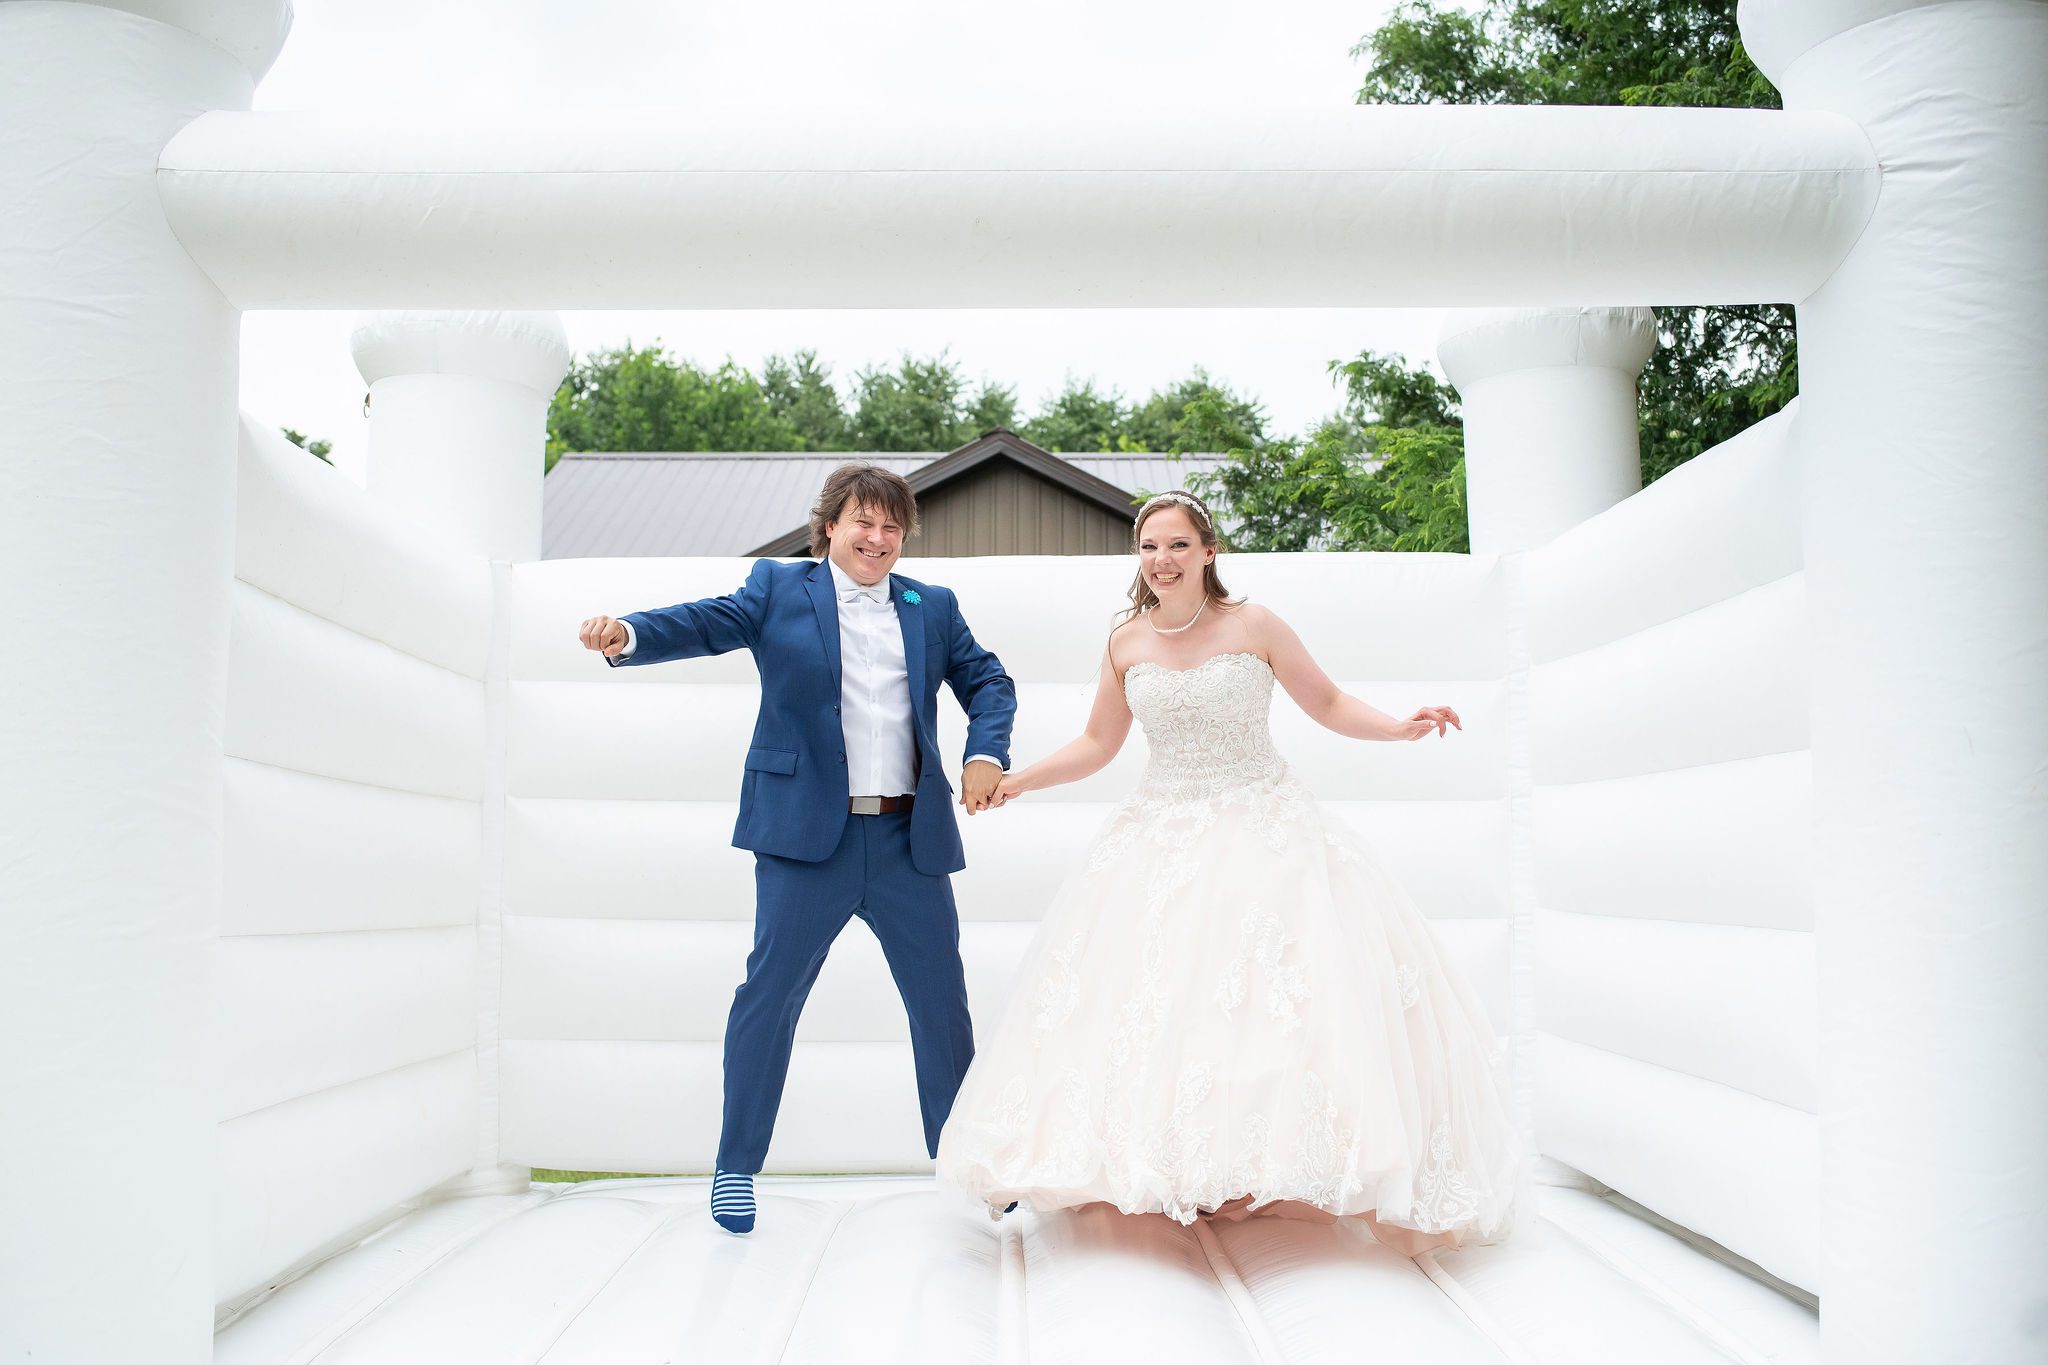 Bride and groom jumping on white bouncy house.